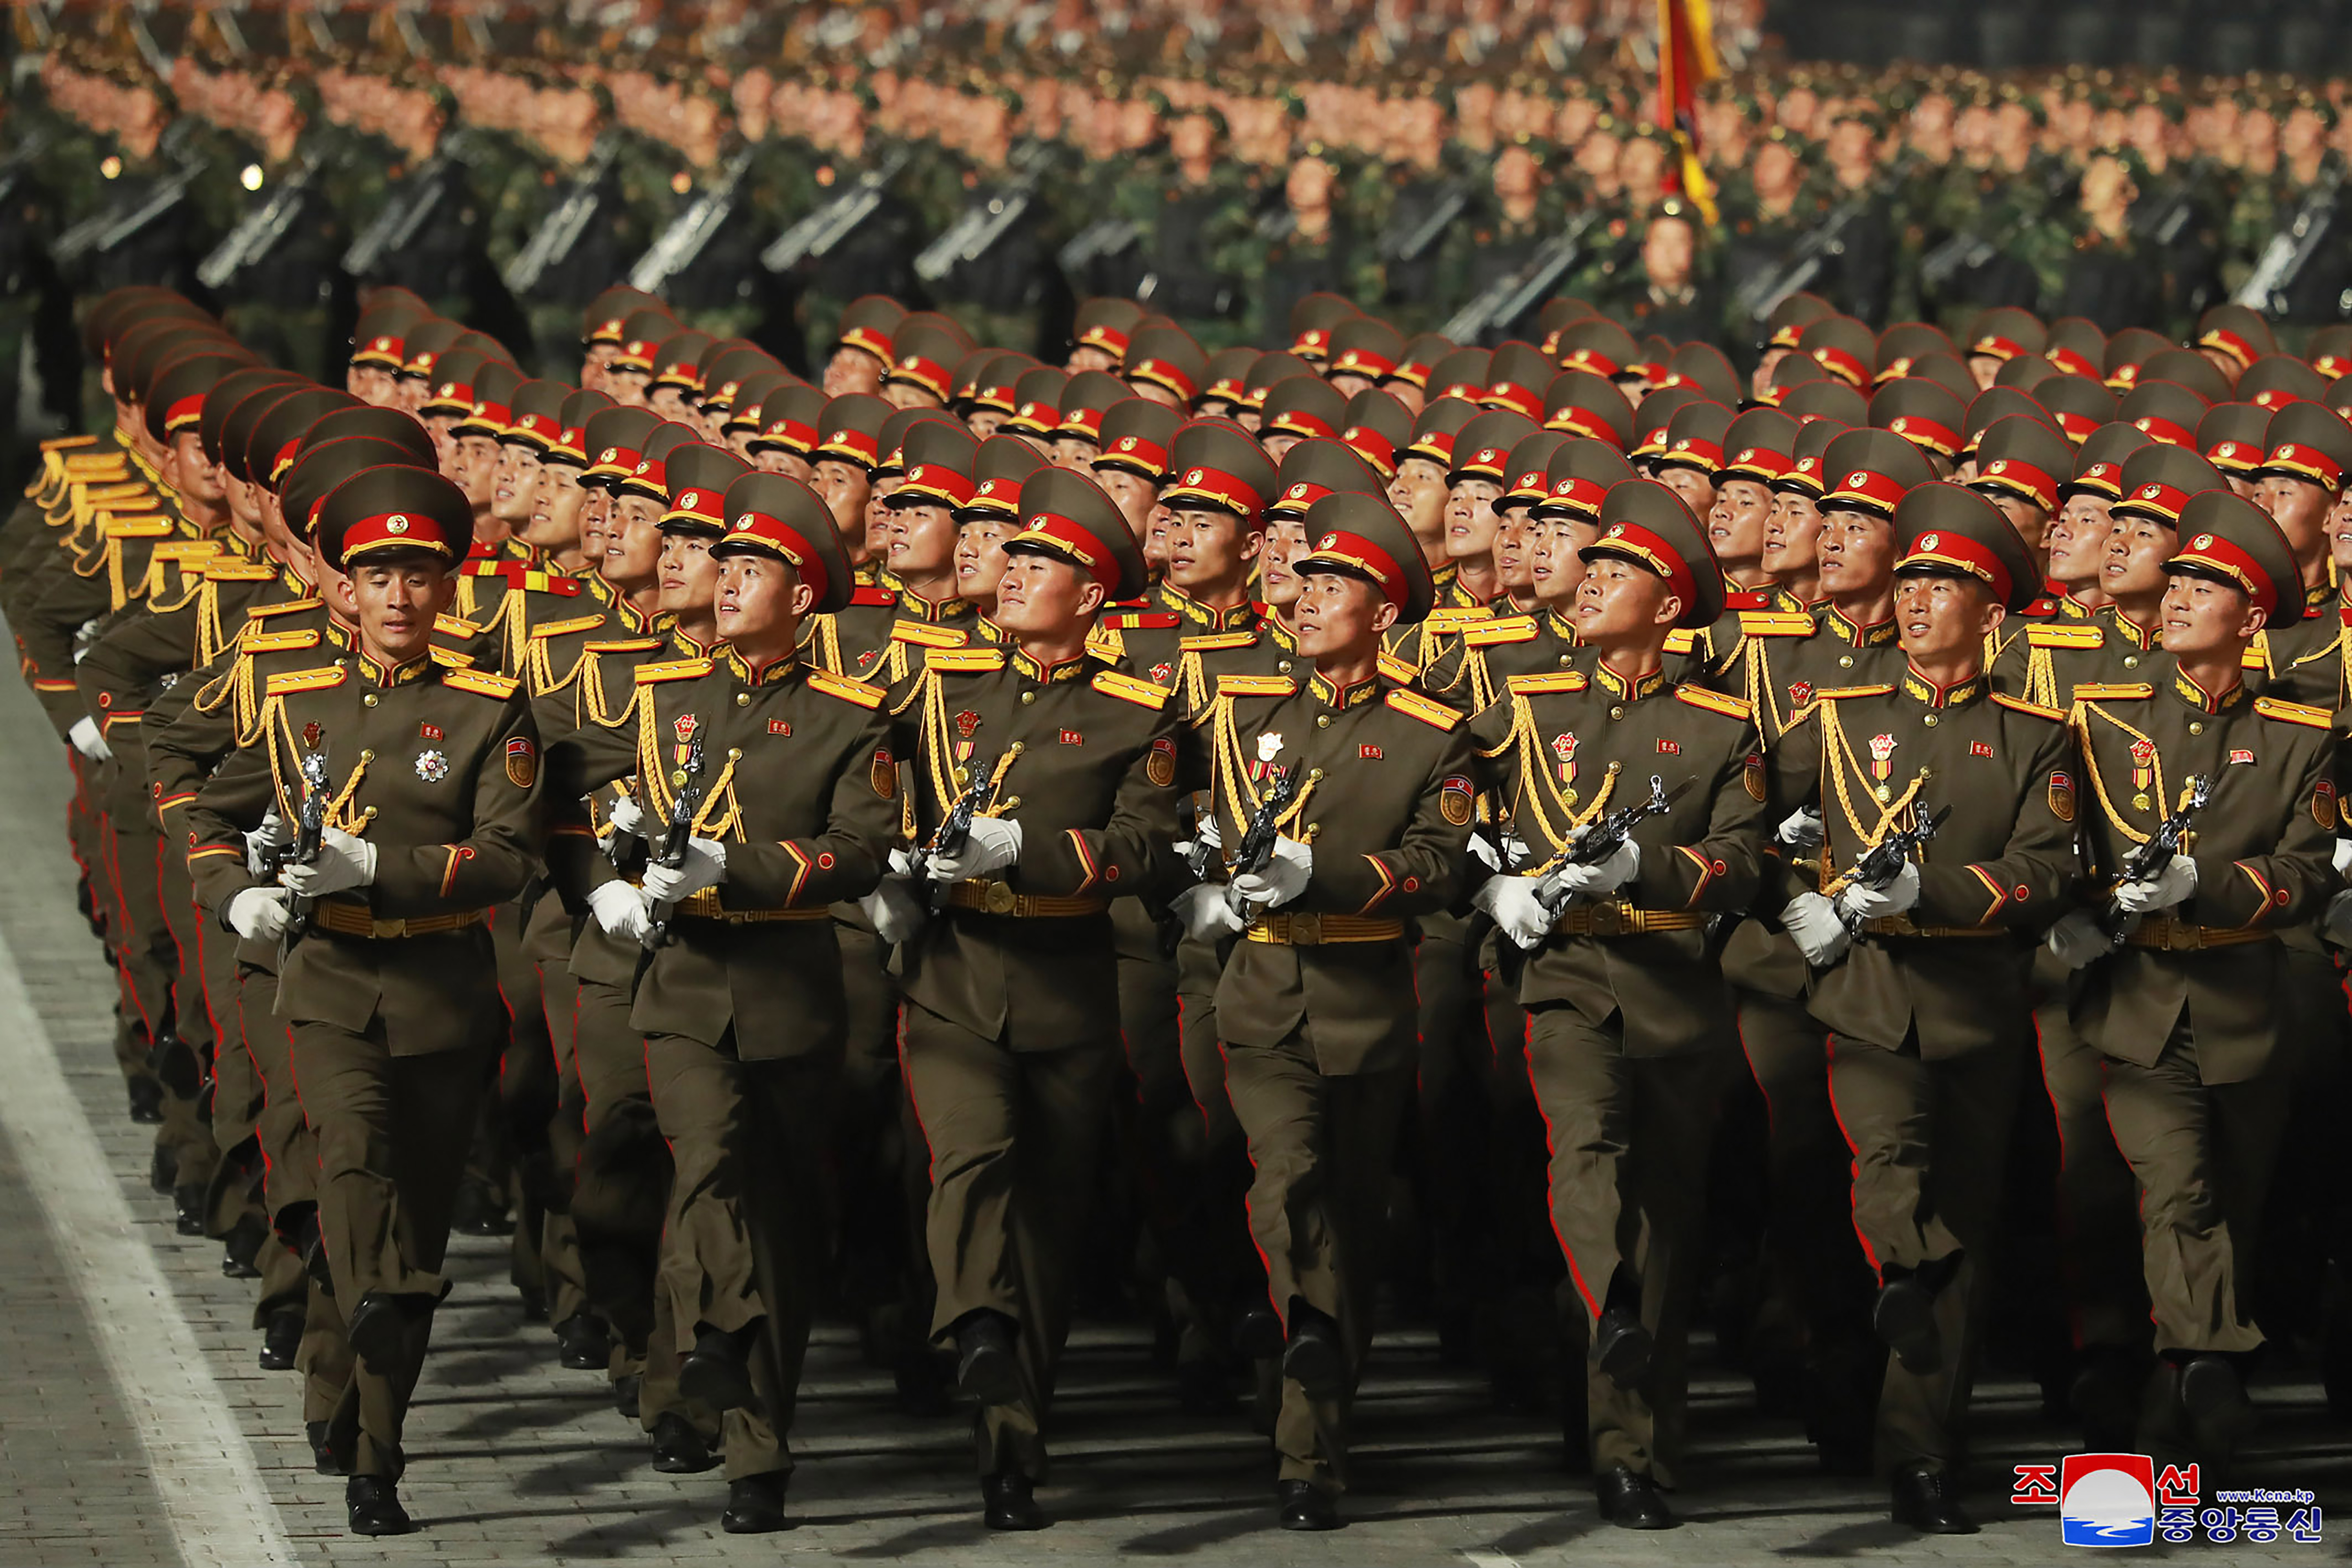 North Korea military 2022: Massive military parade in North Korea showcases the country's most advanced weaponry yet